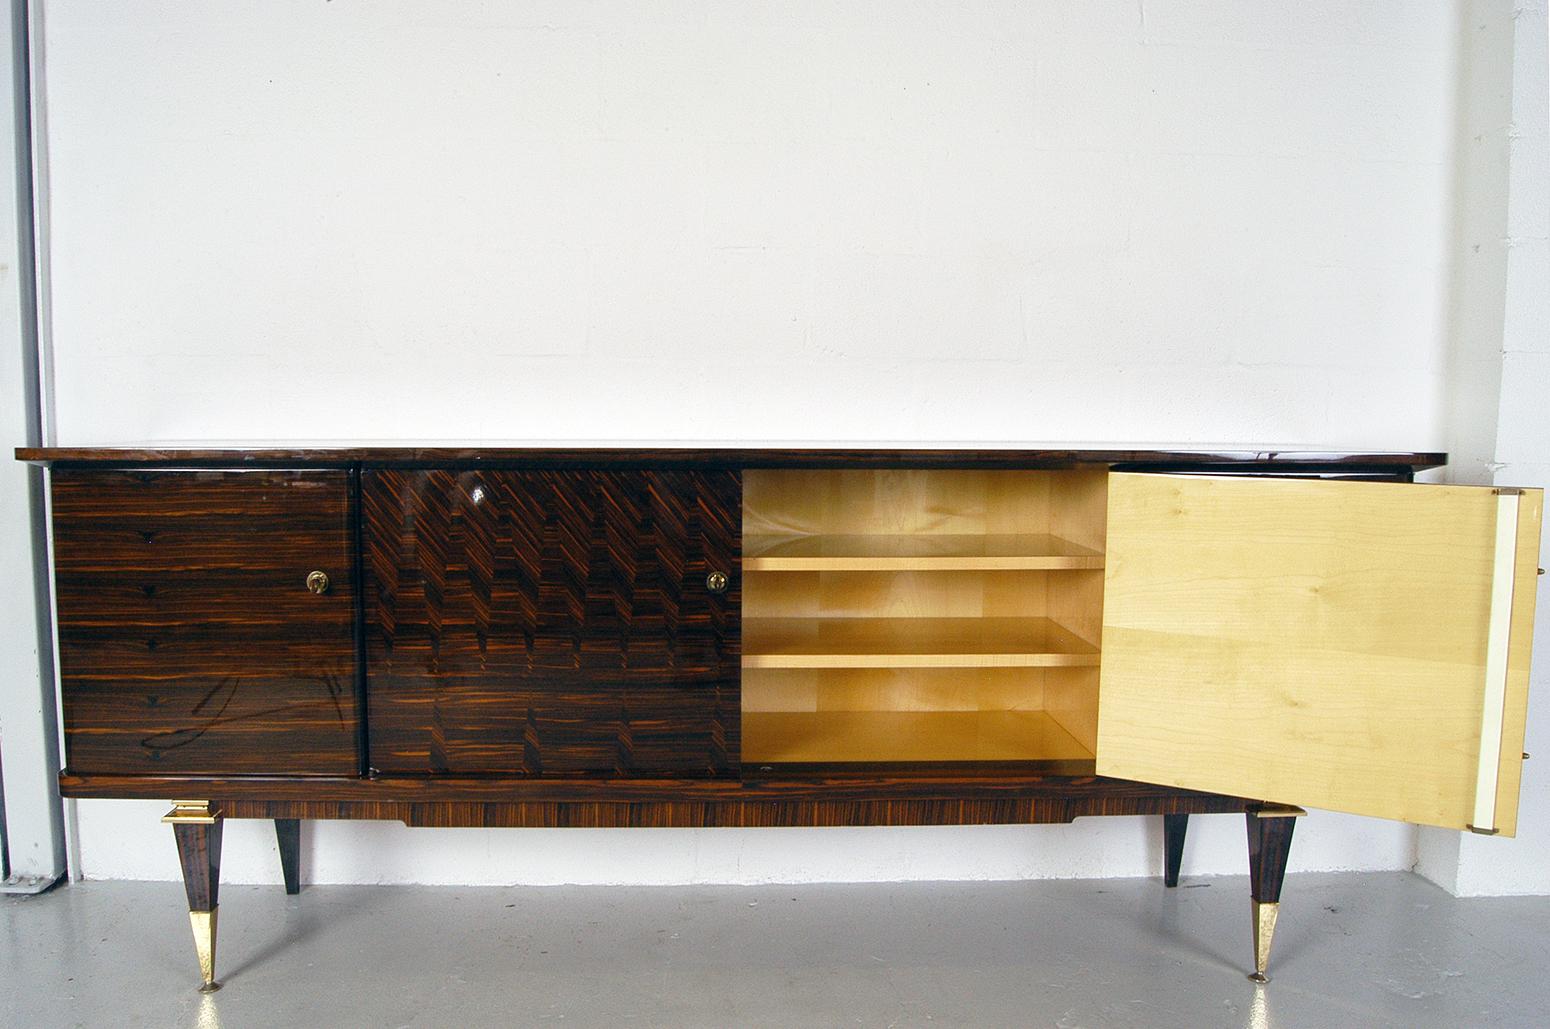  French Lacquered Art Deco Sideboard / Credenza in Macassar Ebony and Maple 1